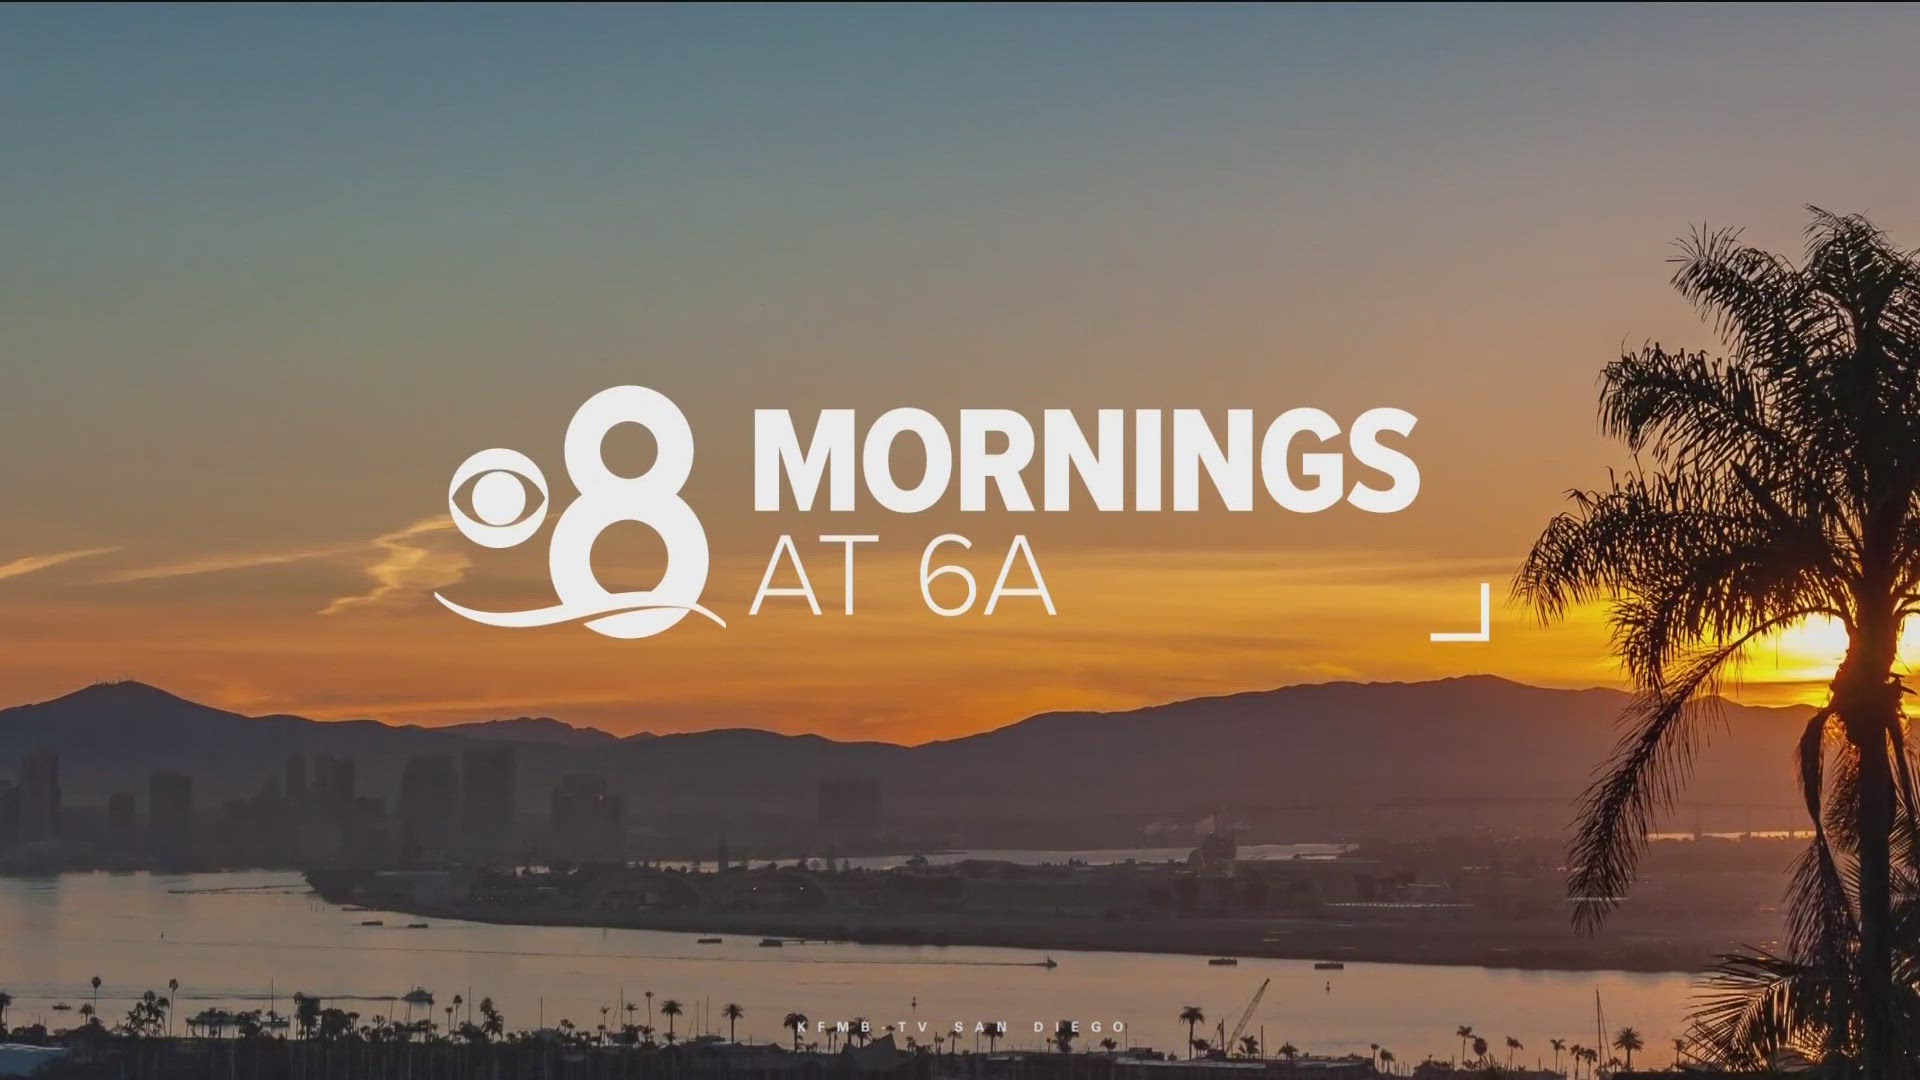 Here are the top stories around San Diego County for the morning of Monday, June 17.
For the latest news, weather and sports, head to:
https://www.cbs8.com/